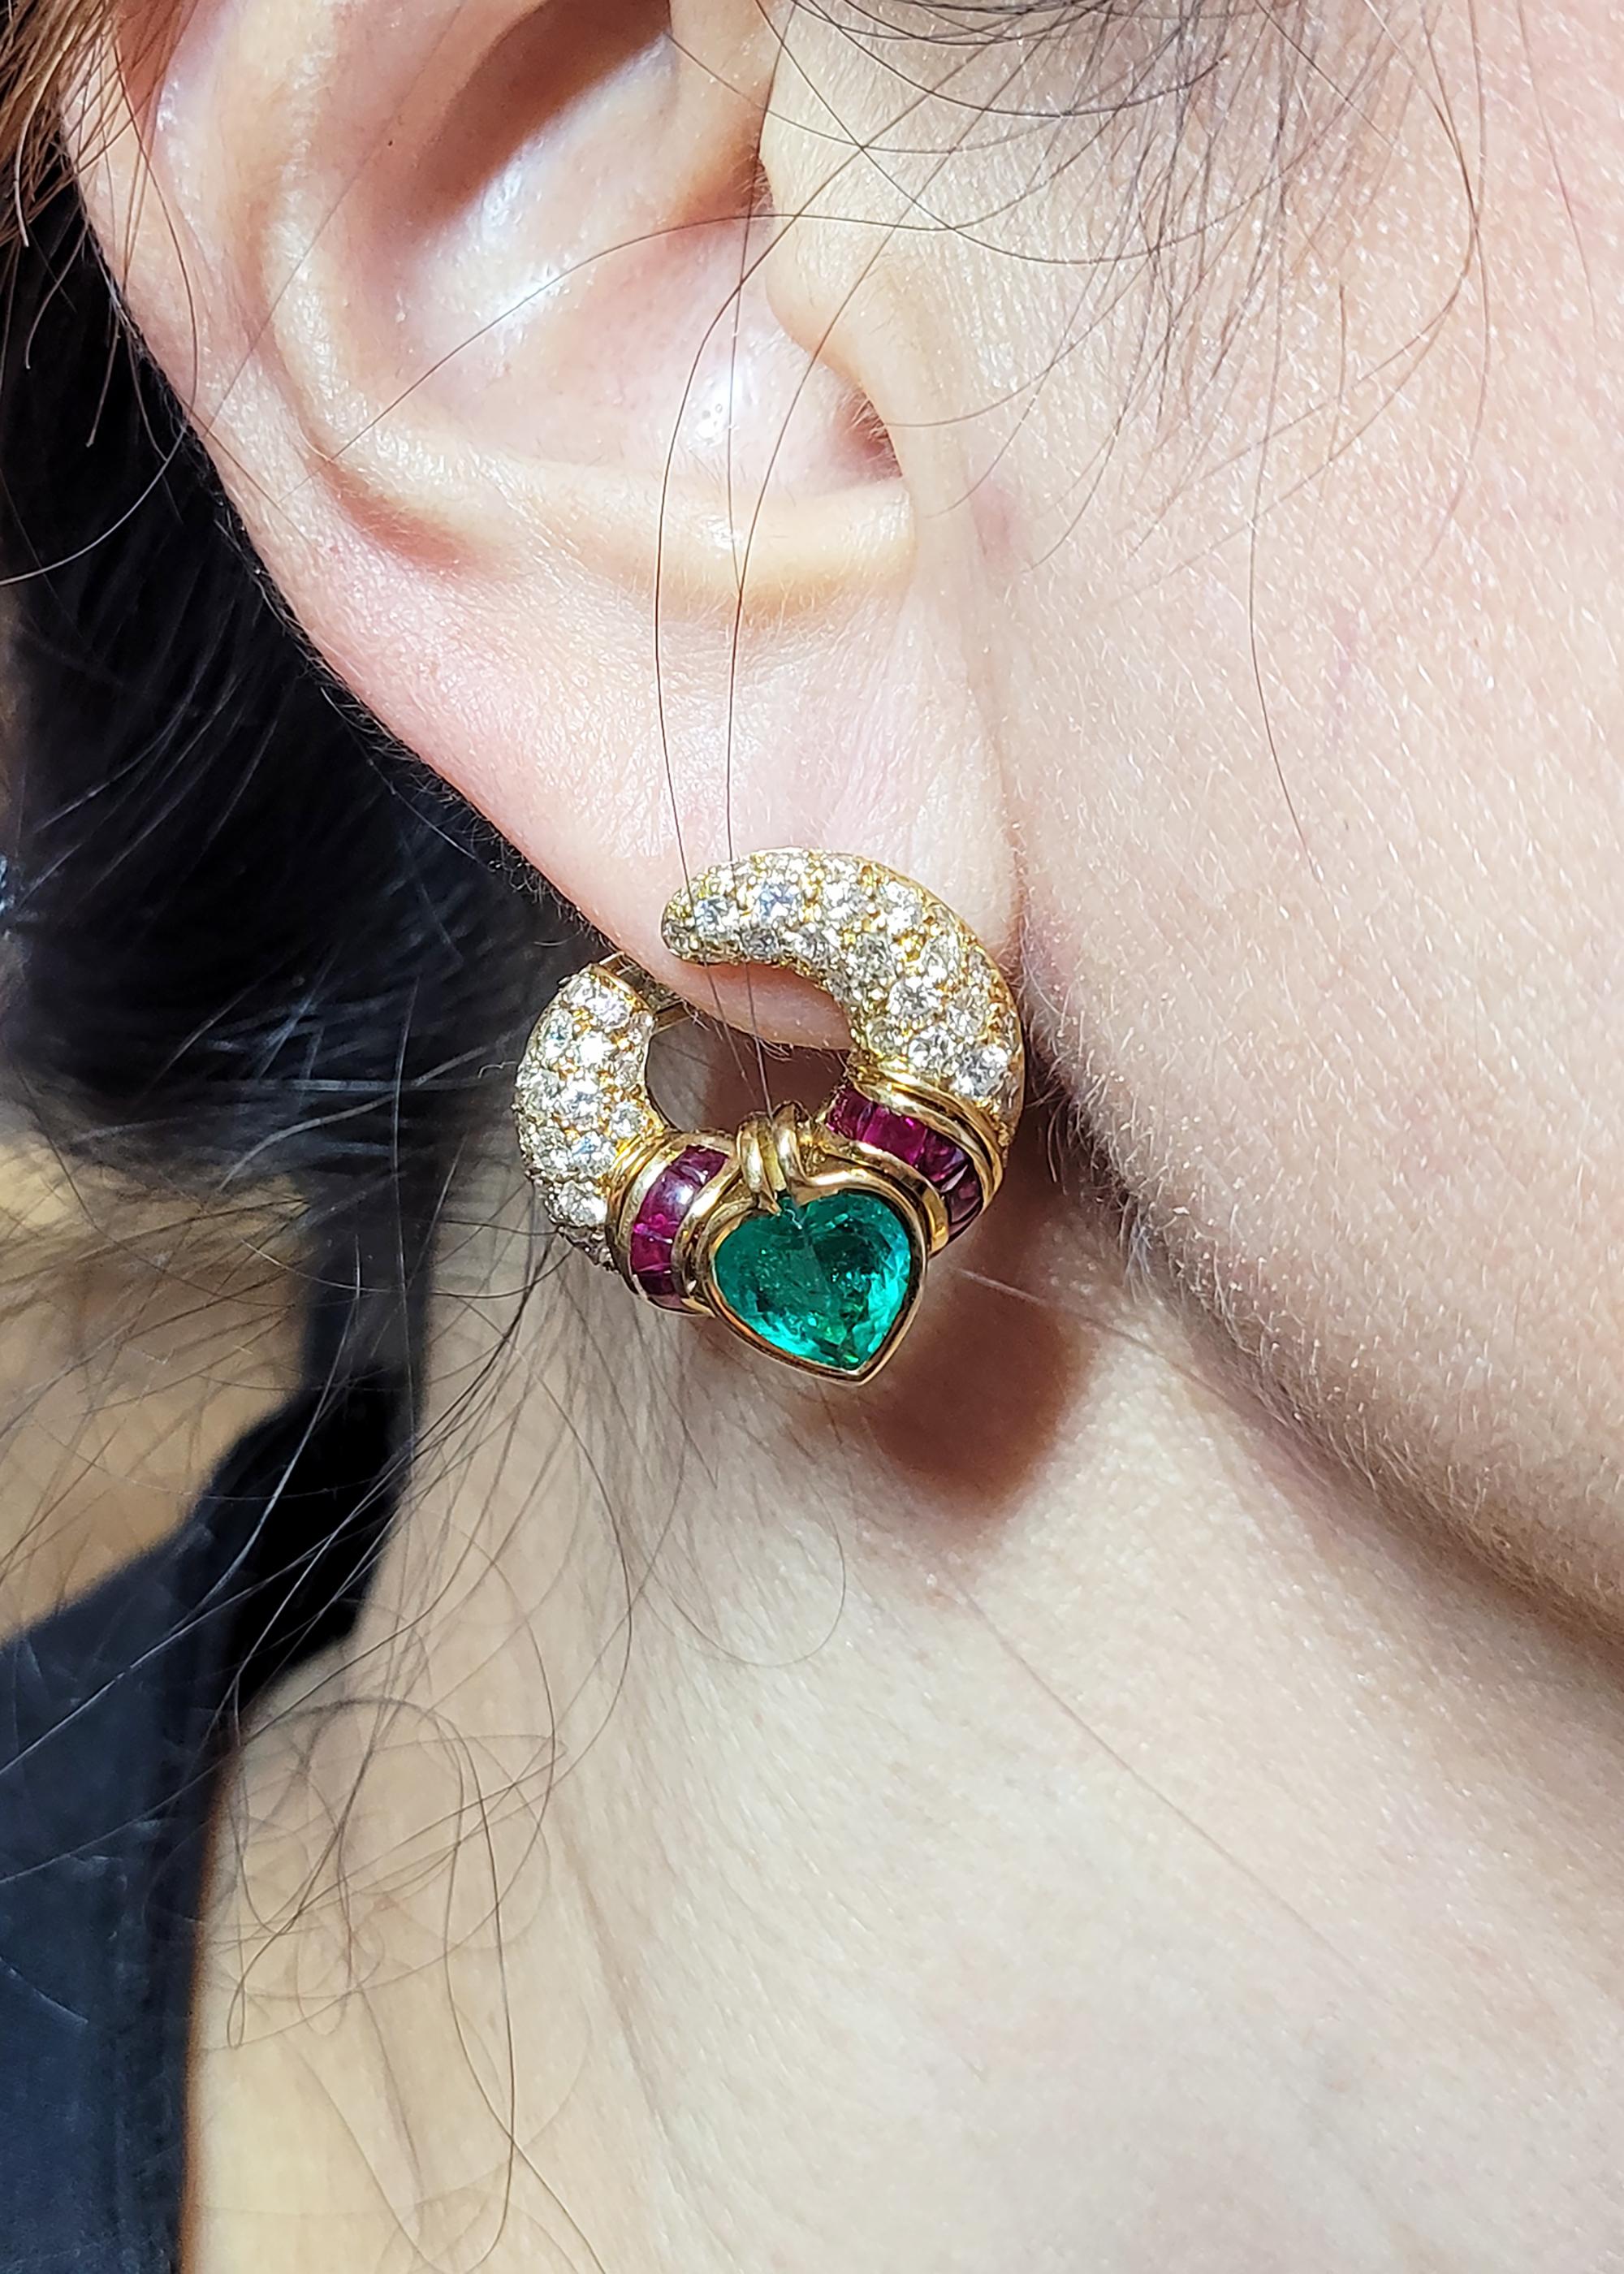 A pair of vintage earrings made by Bvlgari in 1980s.
Comprising of two heart-shape Colombian emeralds, weighing 1.81 carat and 2.04 carat. 
Accented by invisibly-set rubies and white diamonds. 
Metal is 18k yellow gold, weight 16 gram.
Measurements: